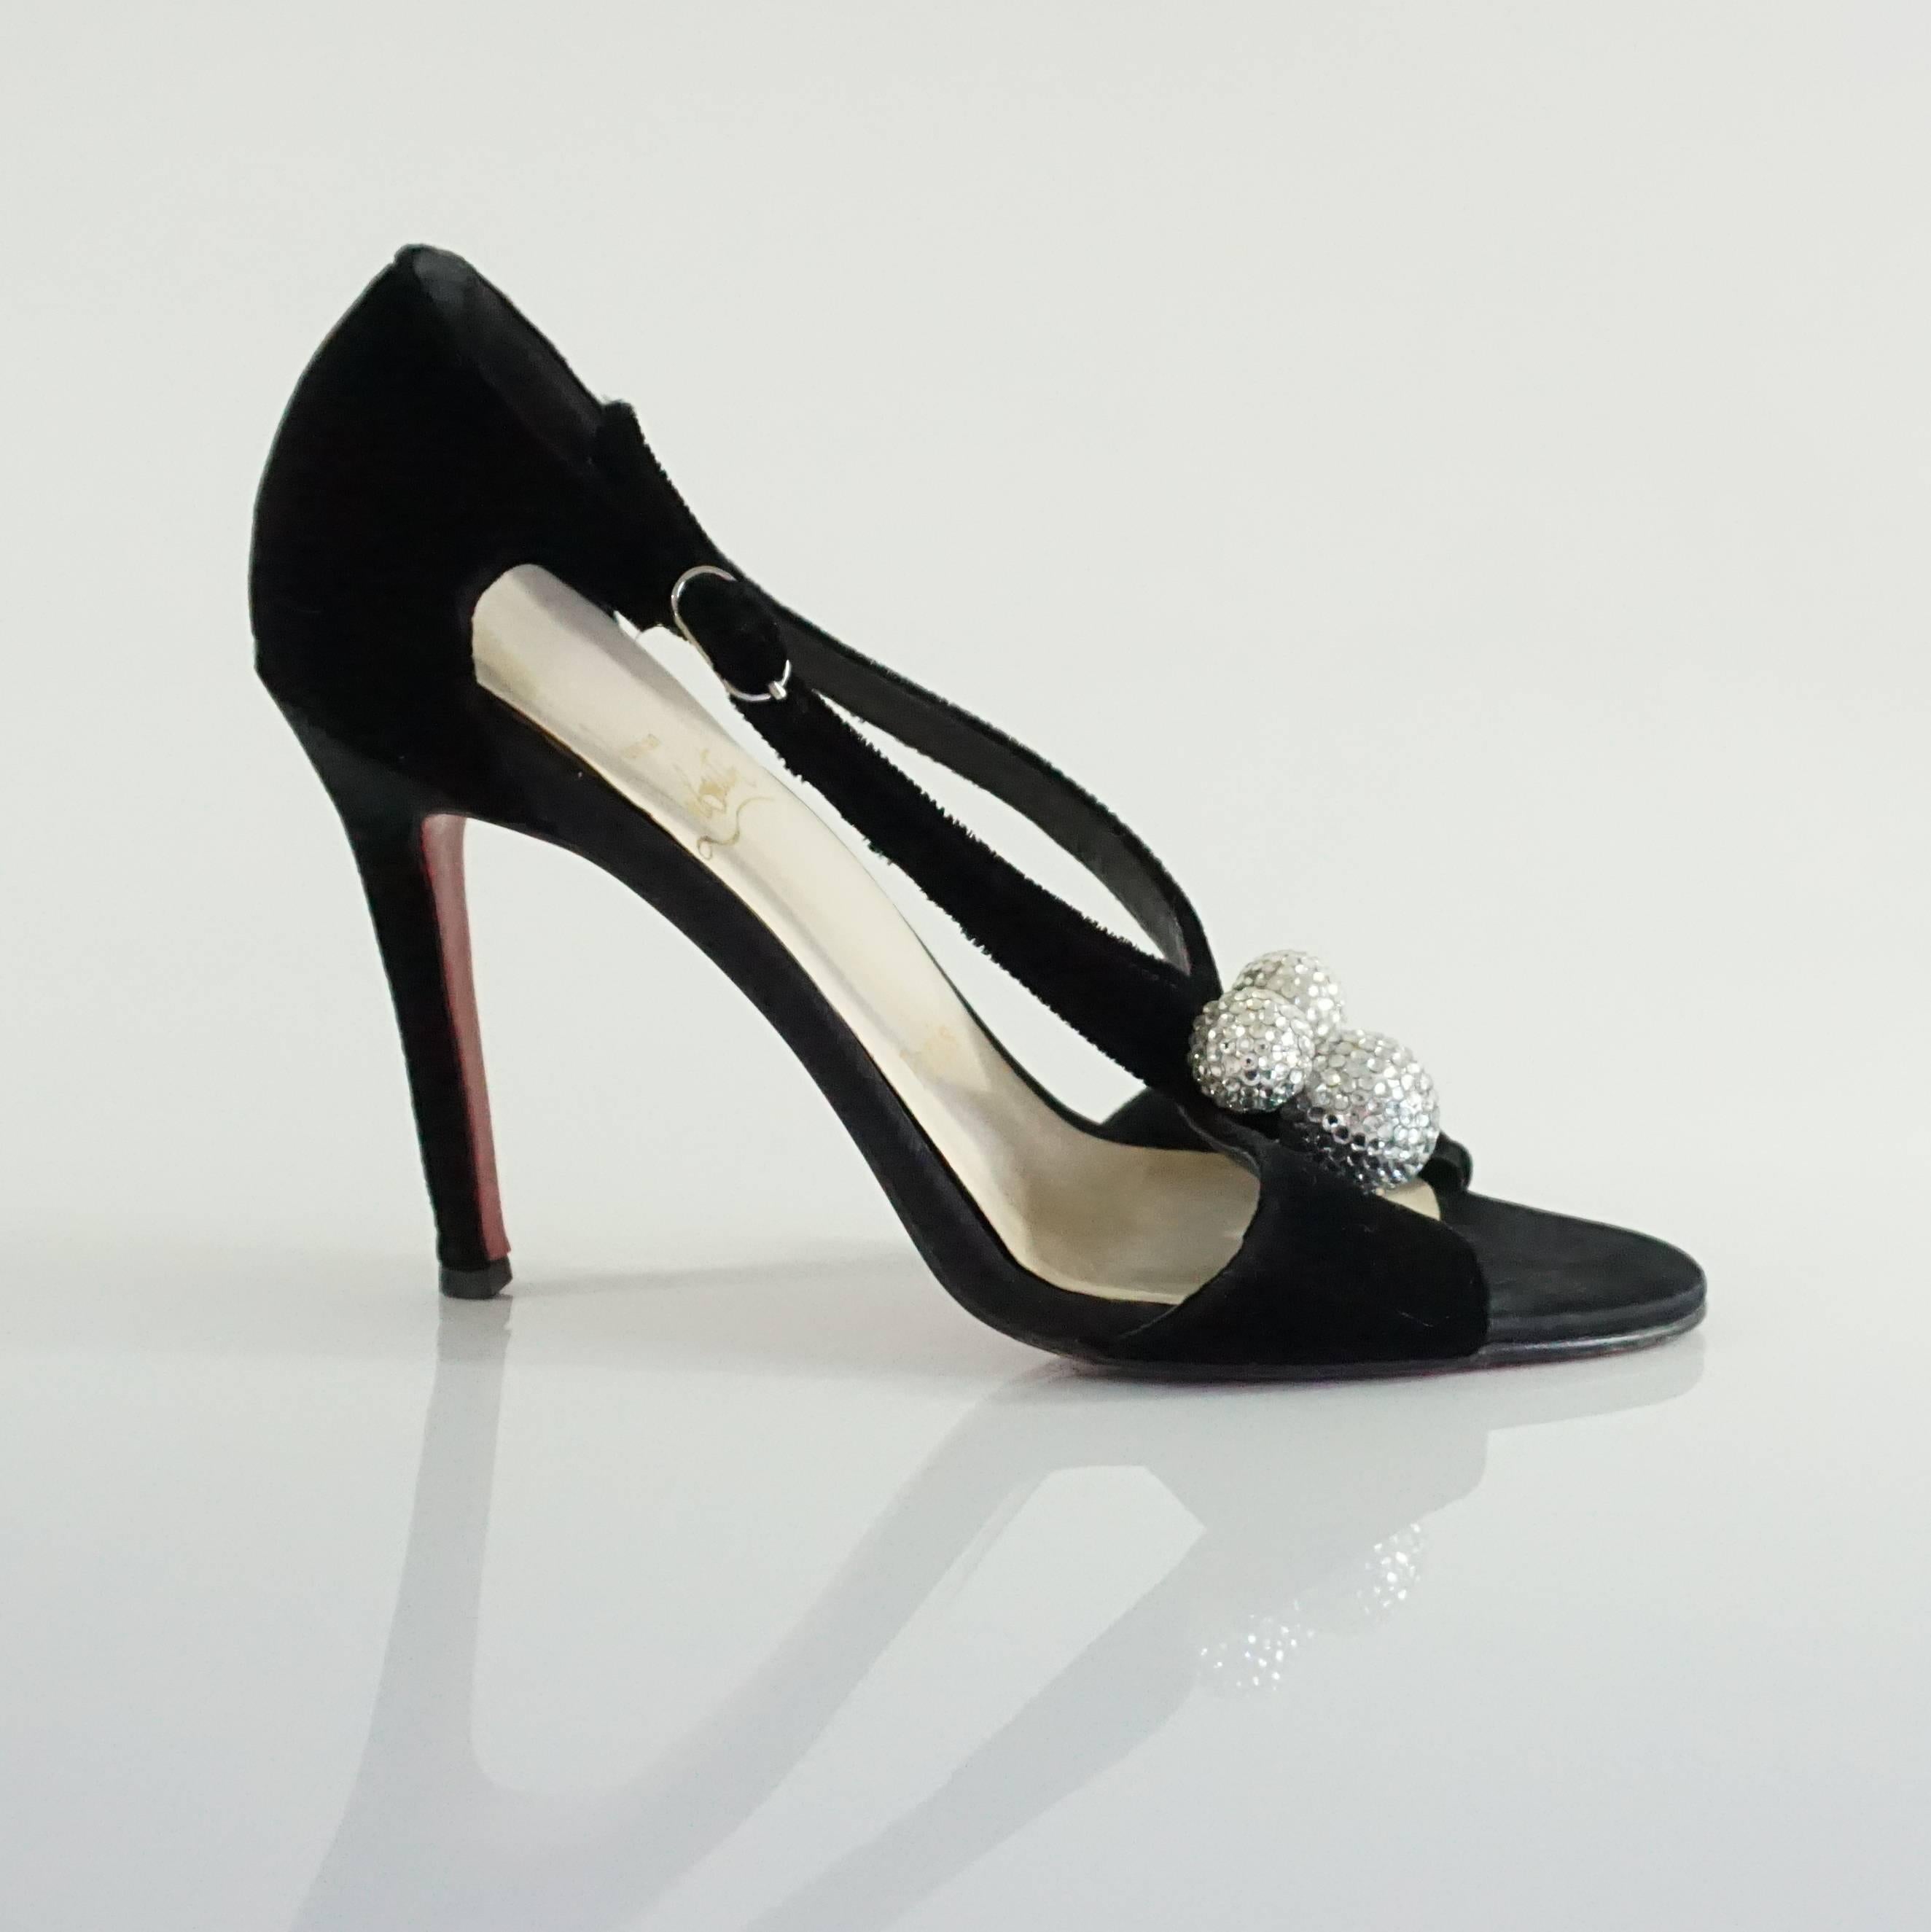 These Christian Louboutin sandals are black velvet and have 3 rhinestone covered balls on the front of them. They feature an open toe and straps that close around the ankle. They are in good condition with some wear on the bottom and toe bed and the